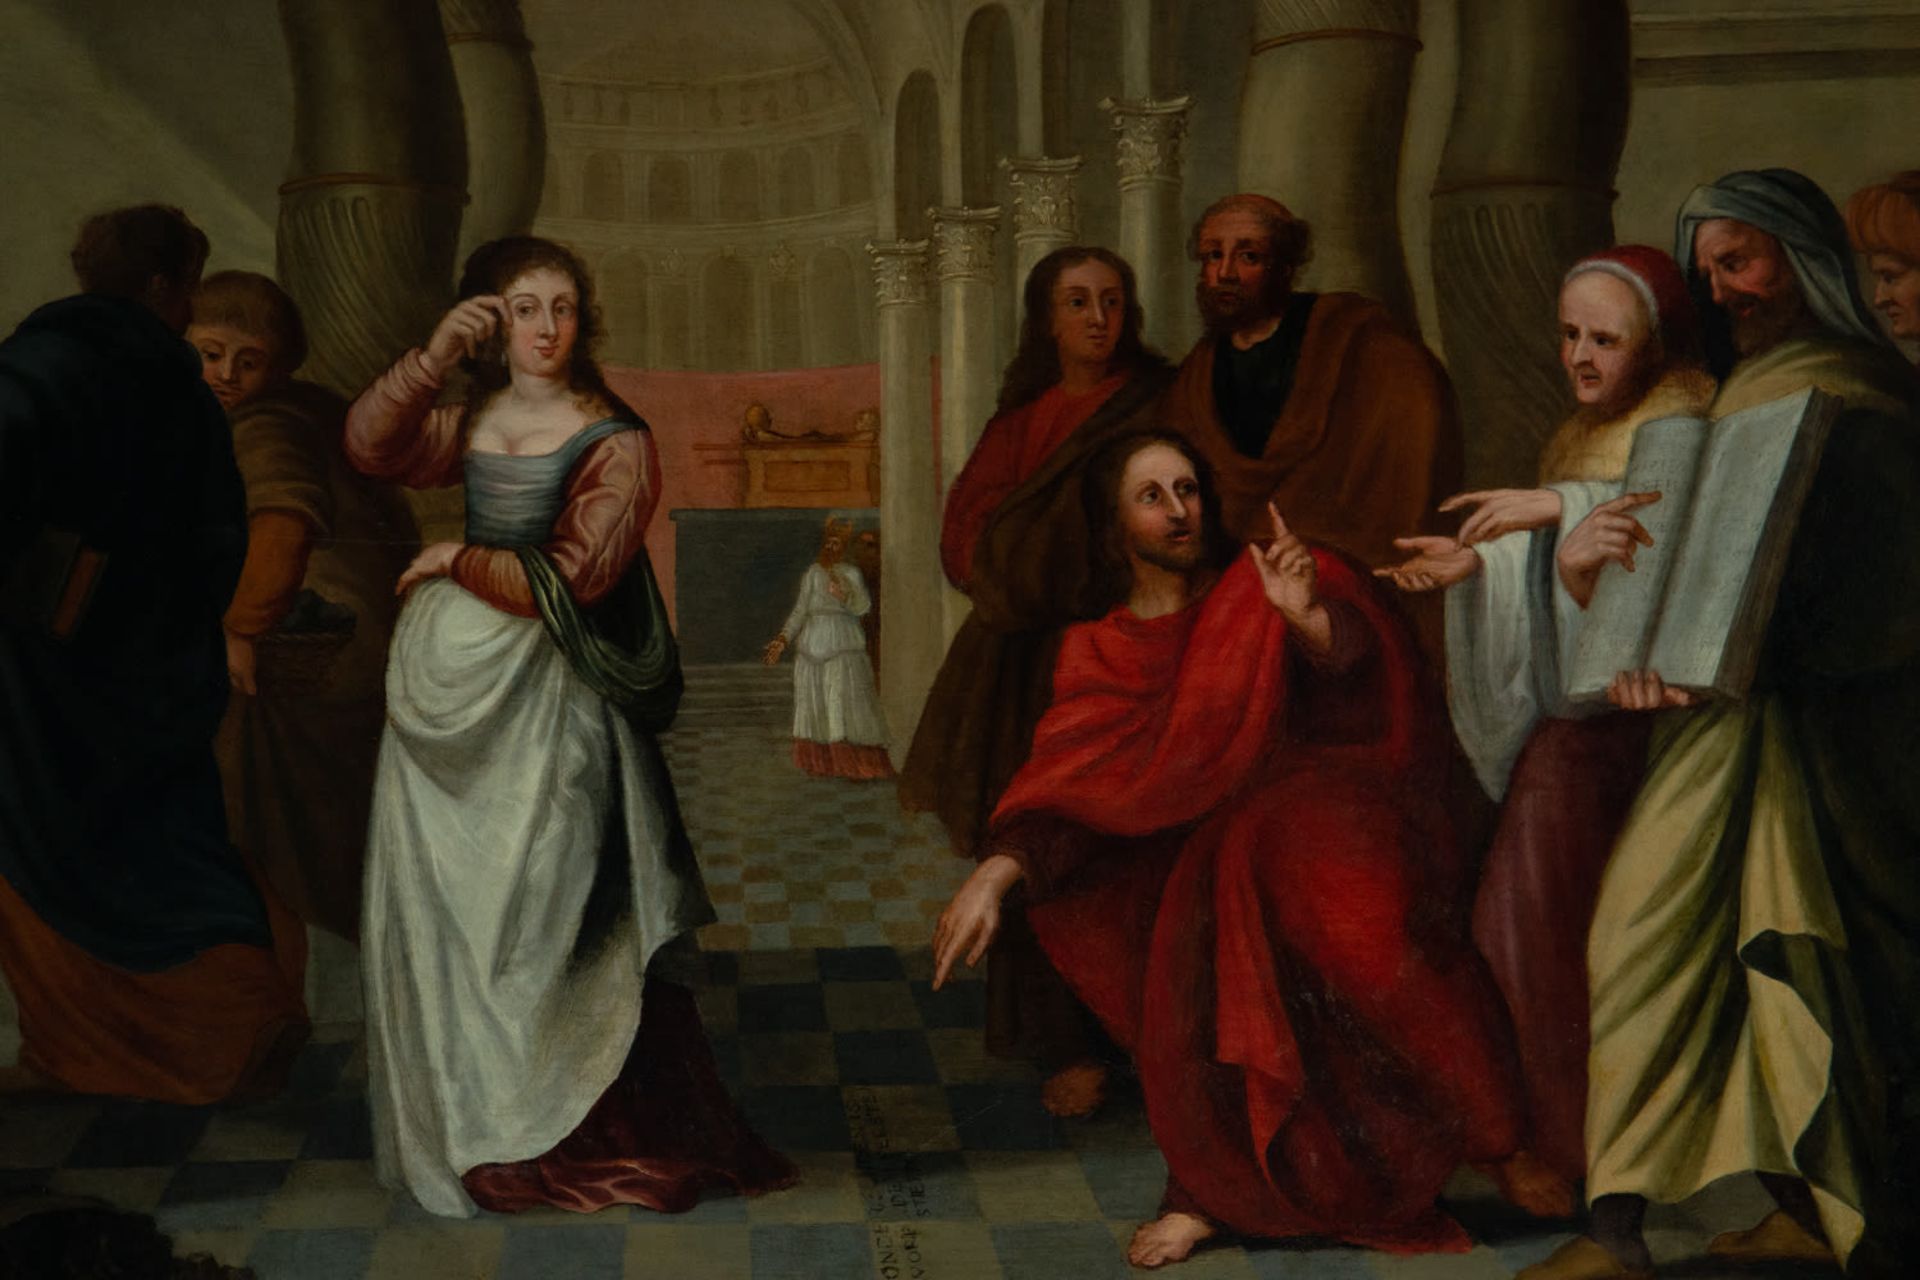 Jesus preaching in the Temple, and the Miracle of Saint Lazarus, 17th century Flemish school - Image 16 of 16